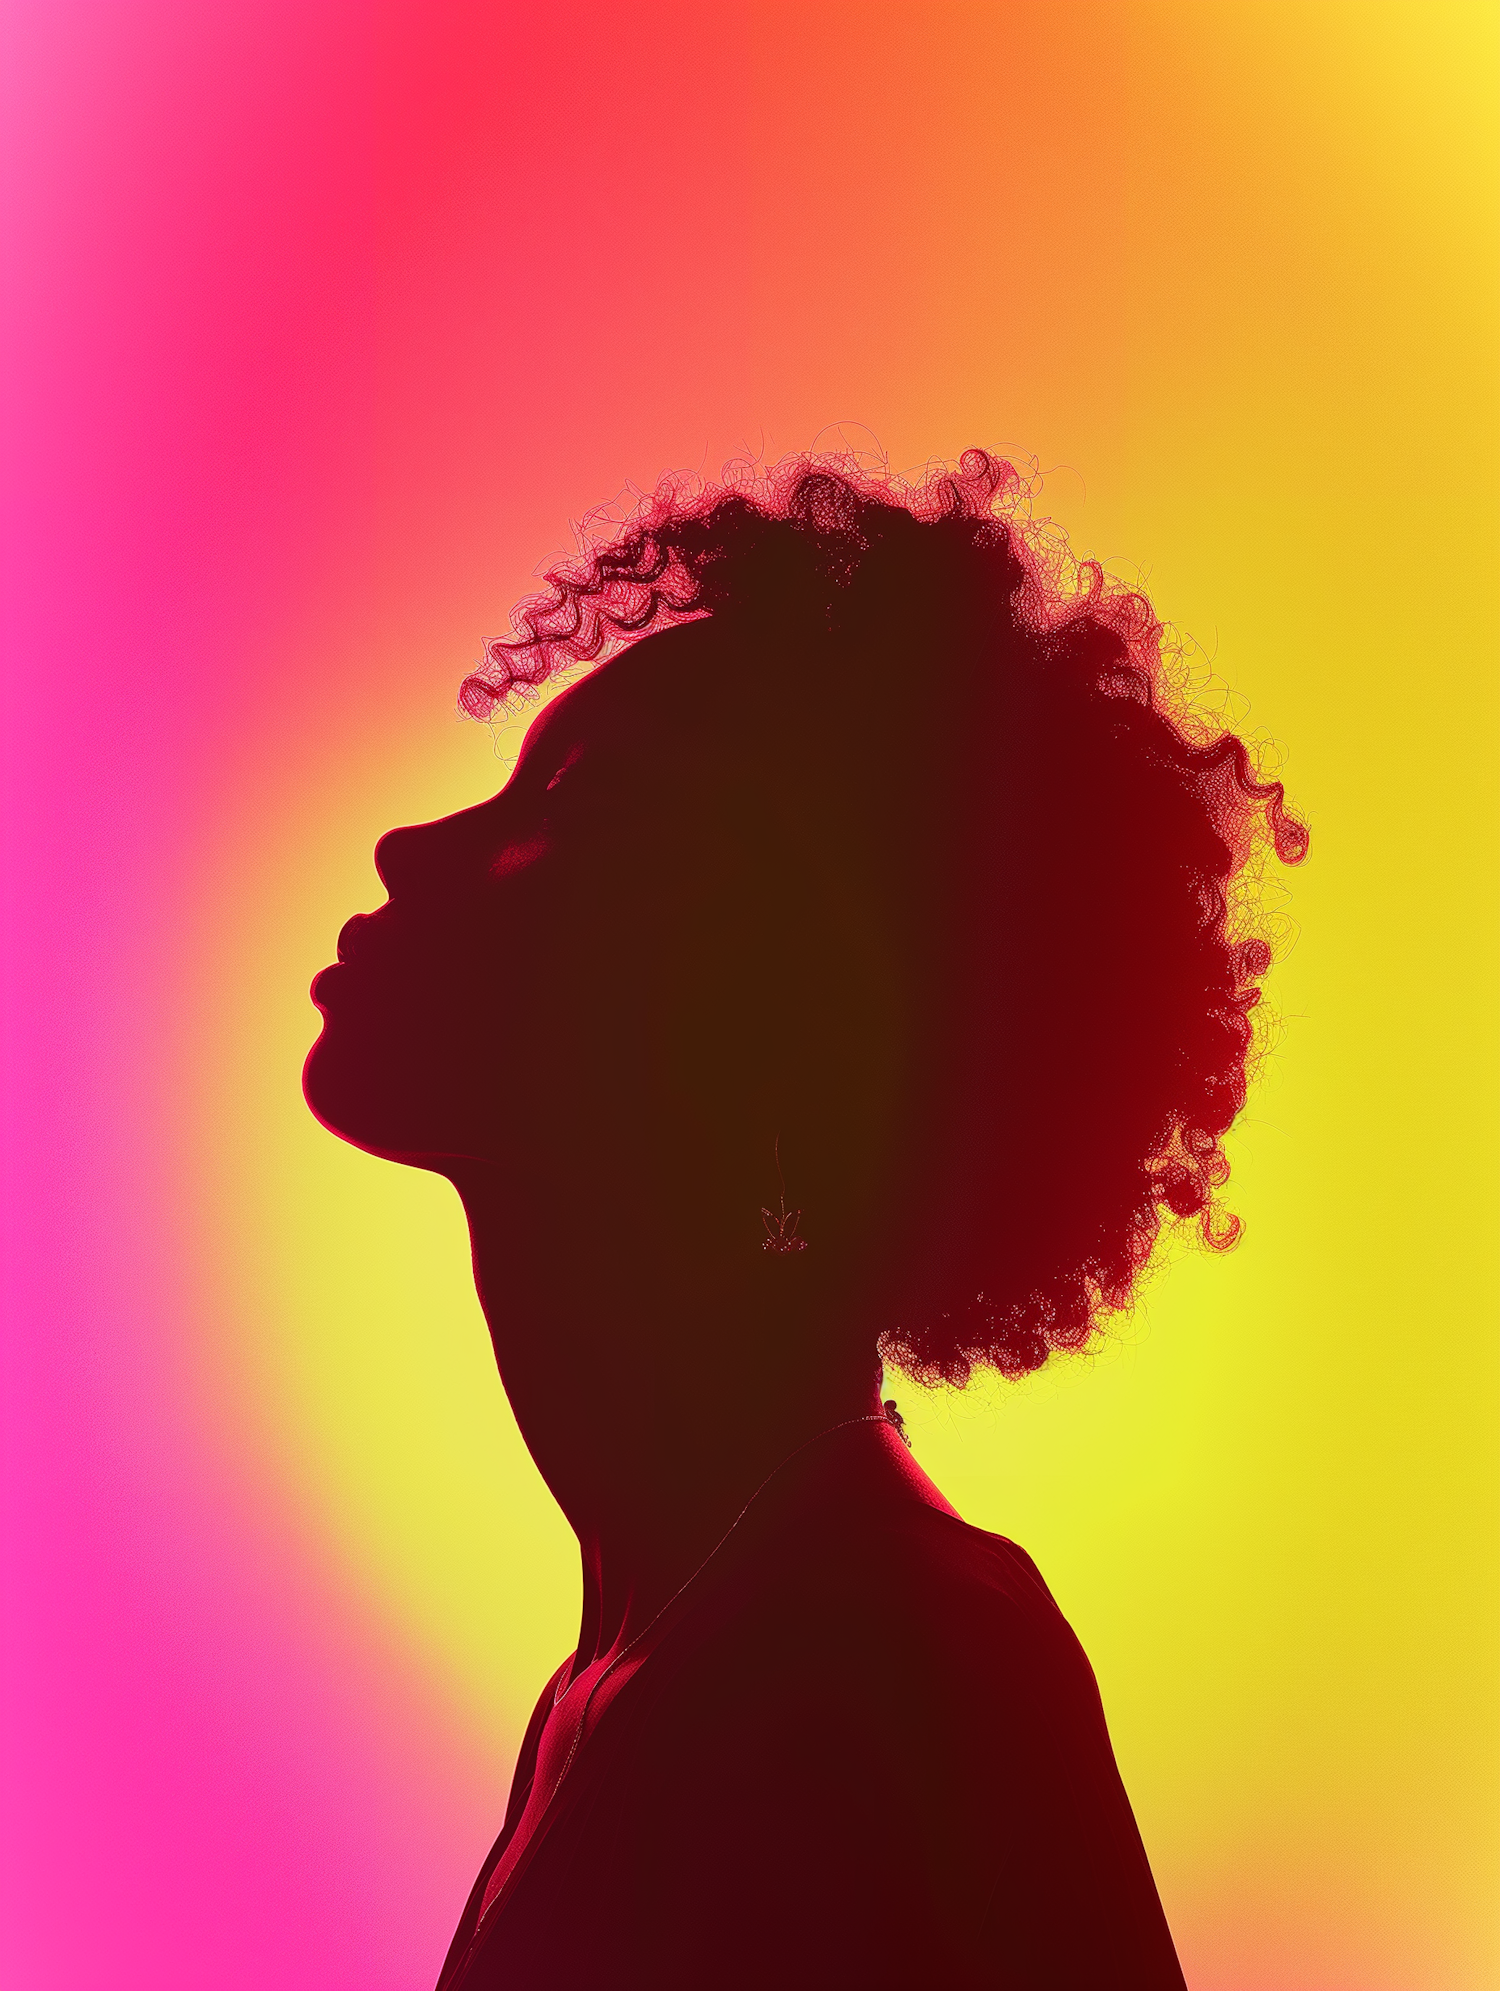 Silhouette of a Person on Gradient Background